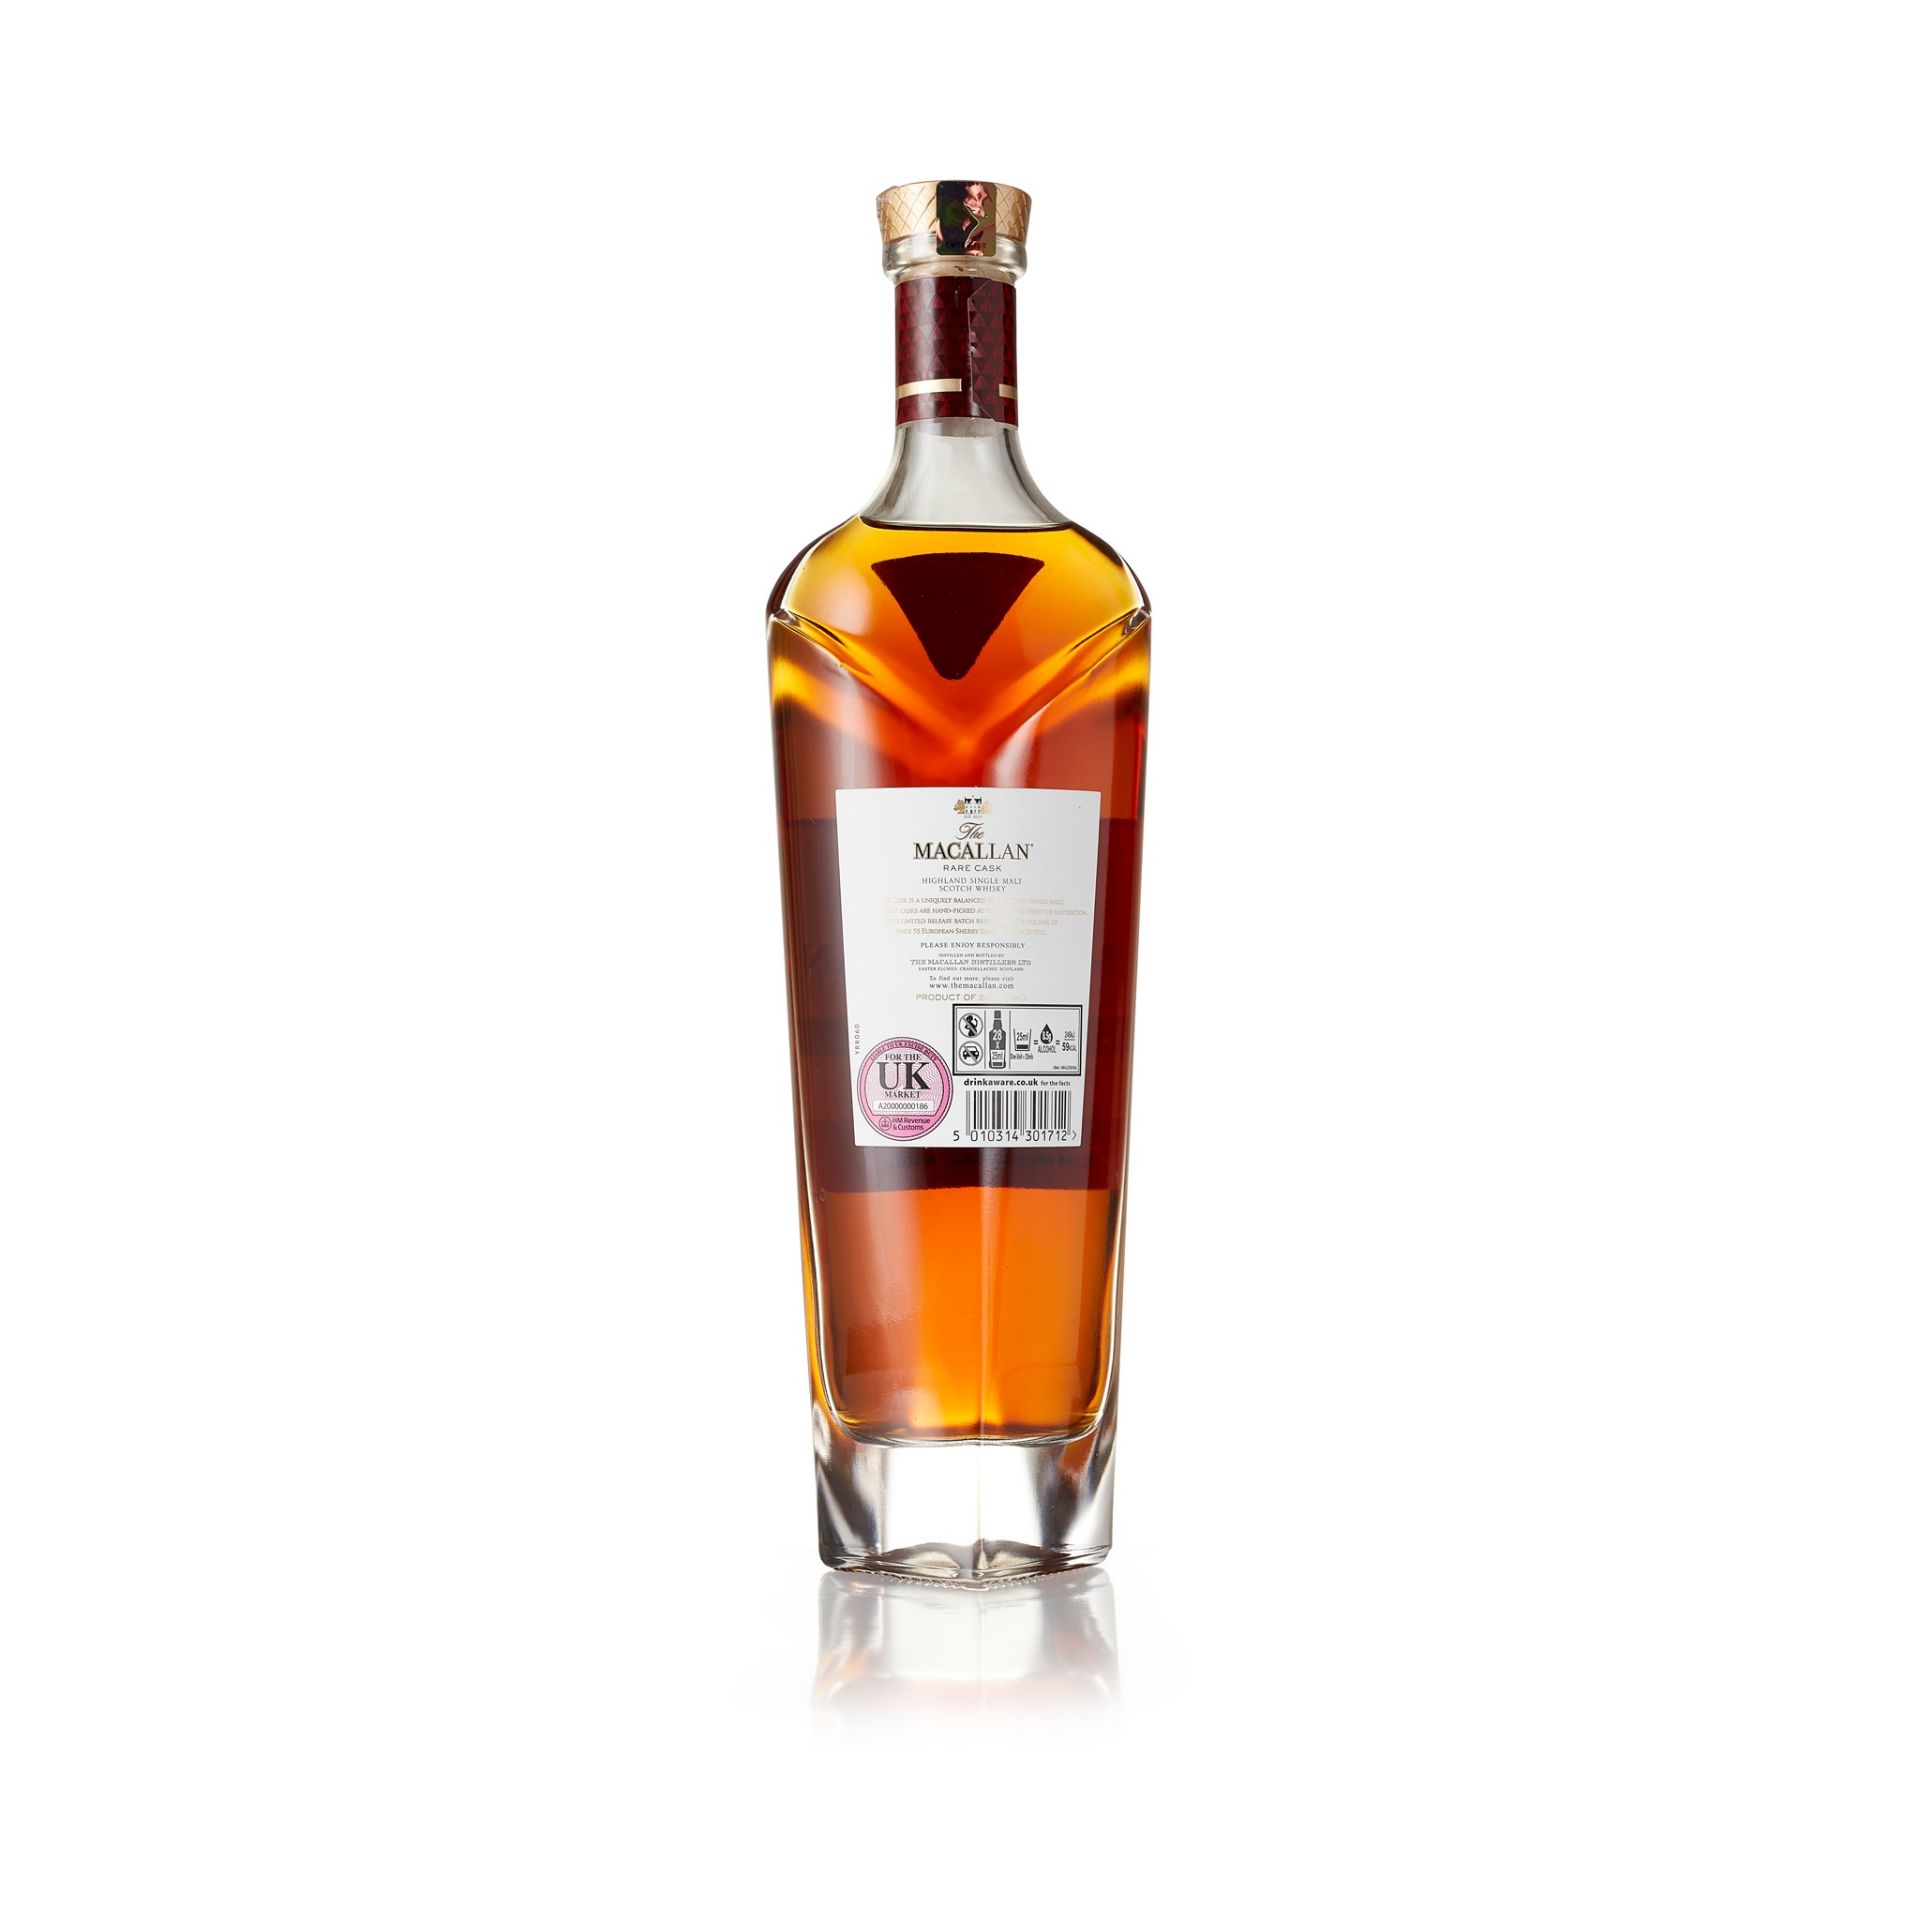 THE MACALLAN RARE CASK 2018 BATCH ONE - Image 2 of 3